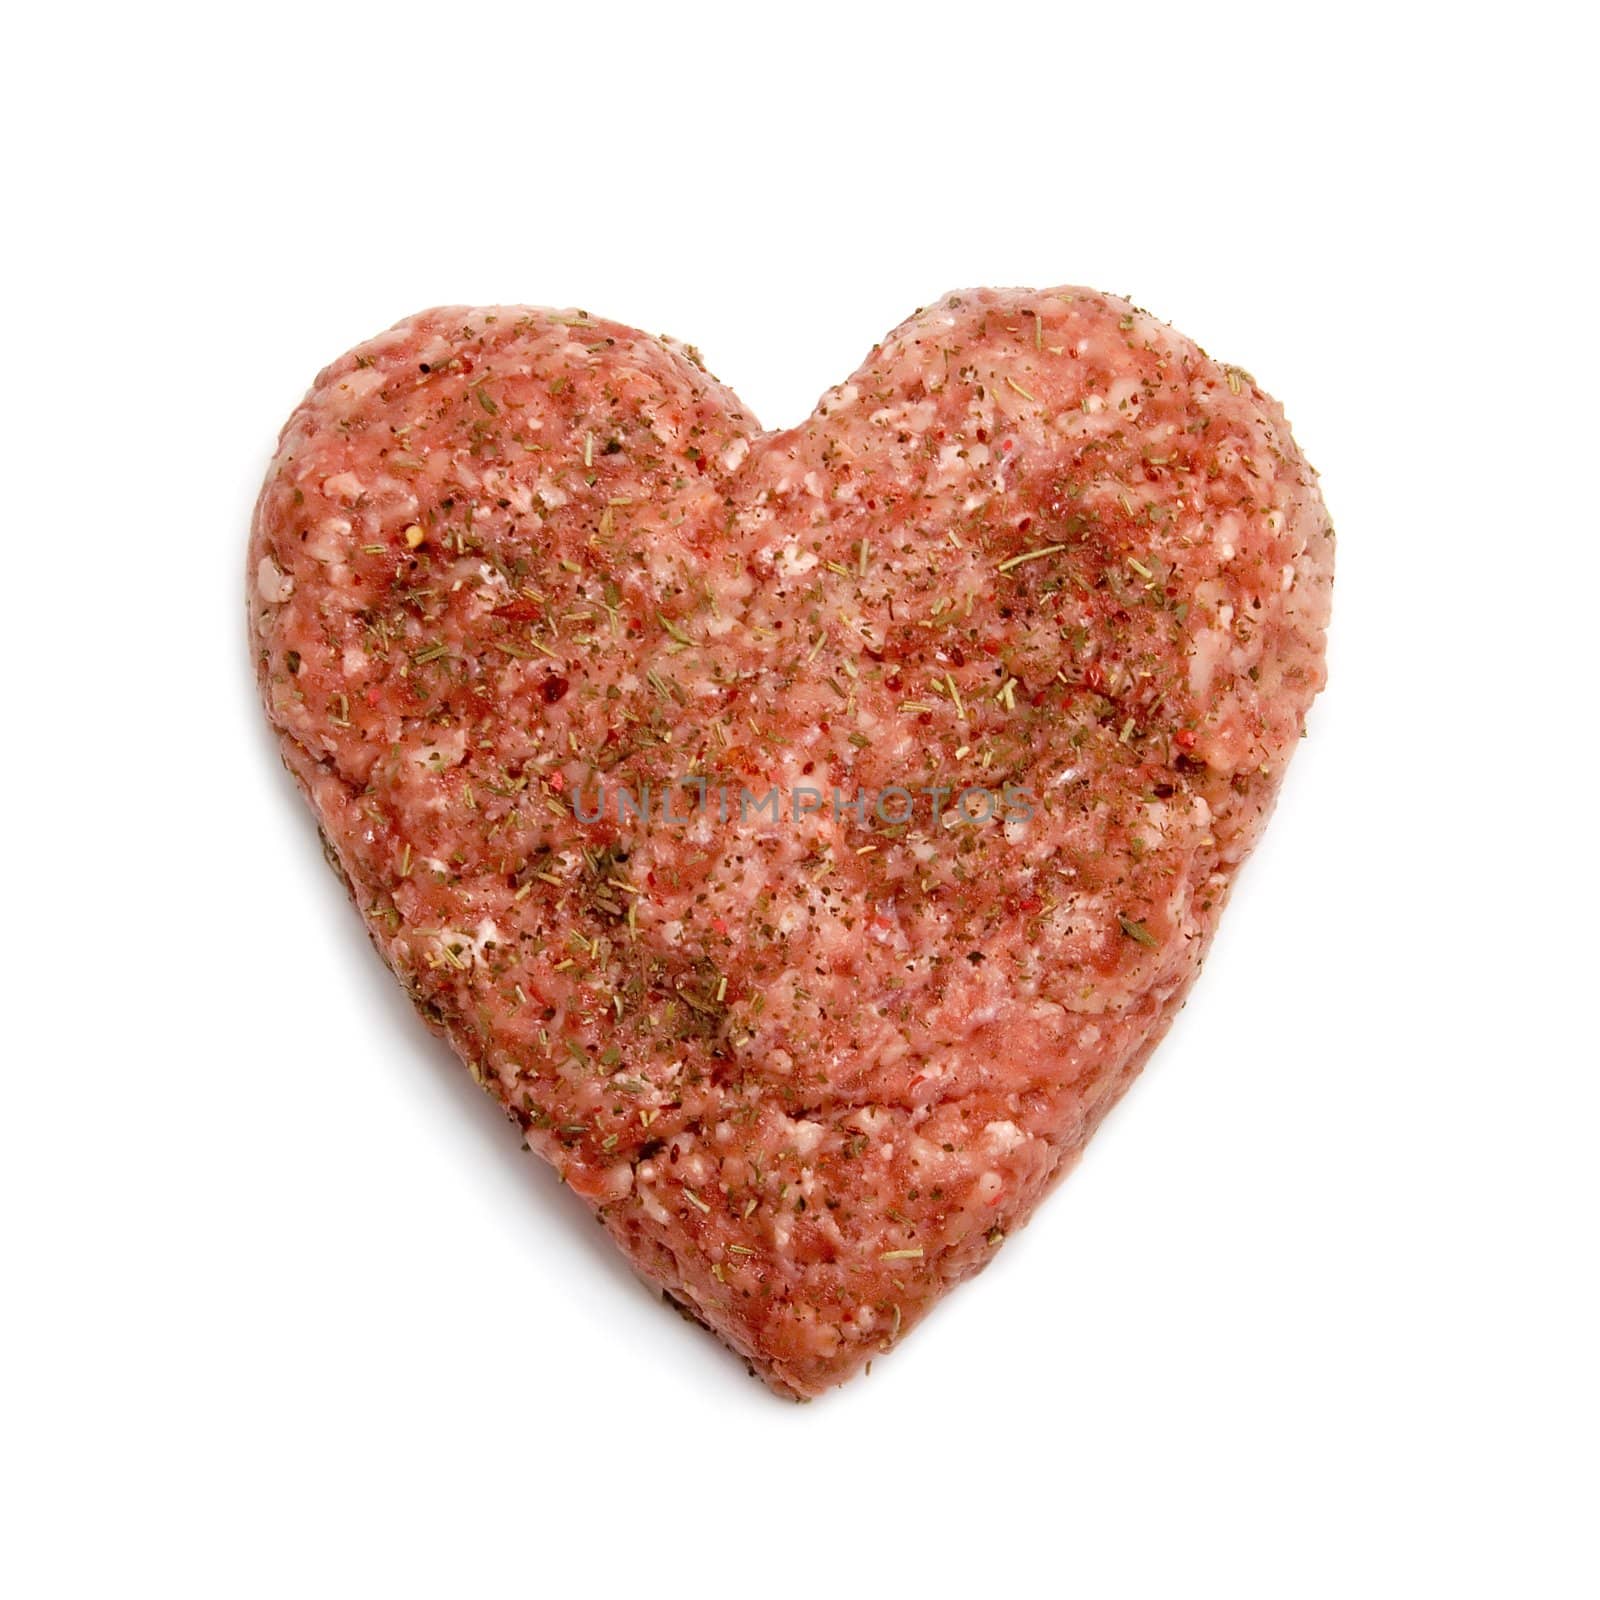 Heart made of minced meat